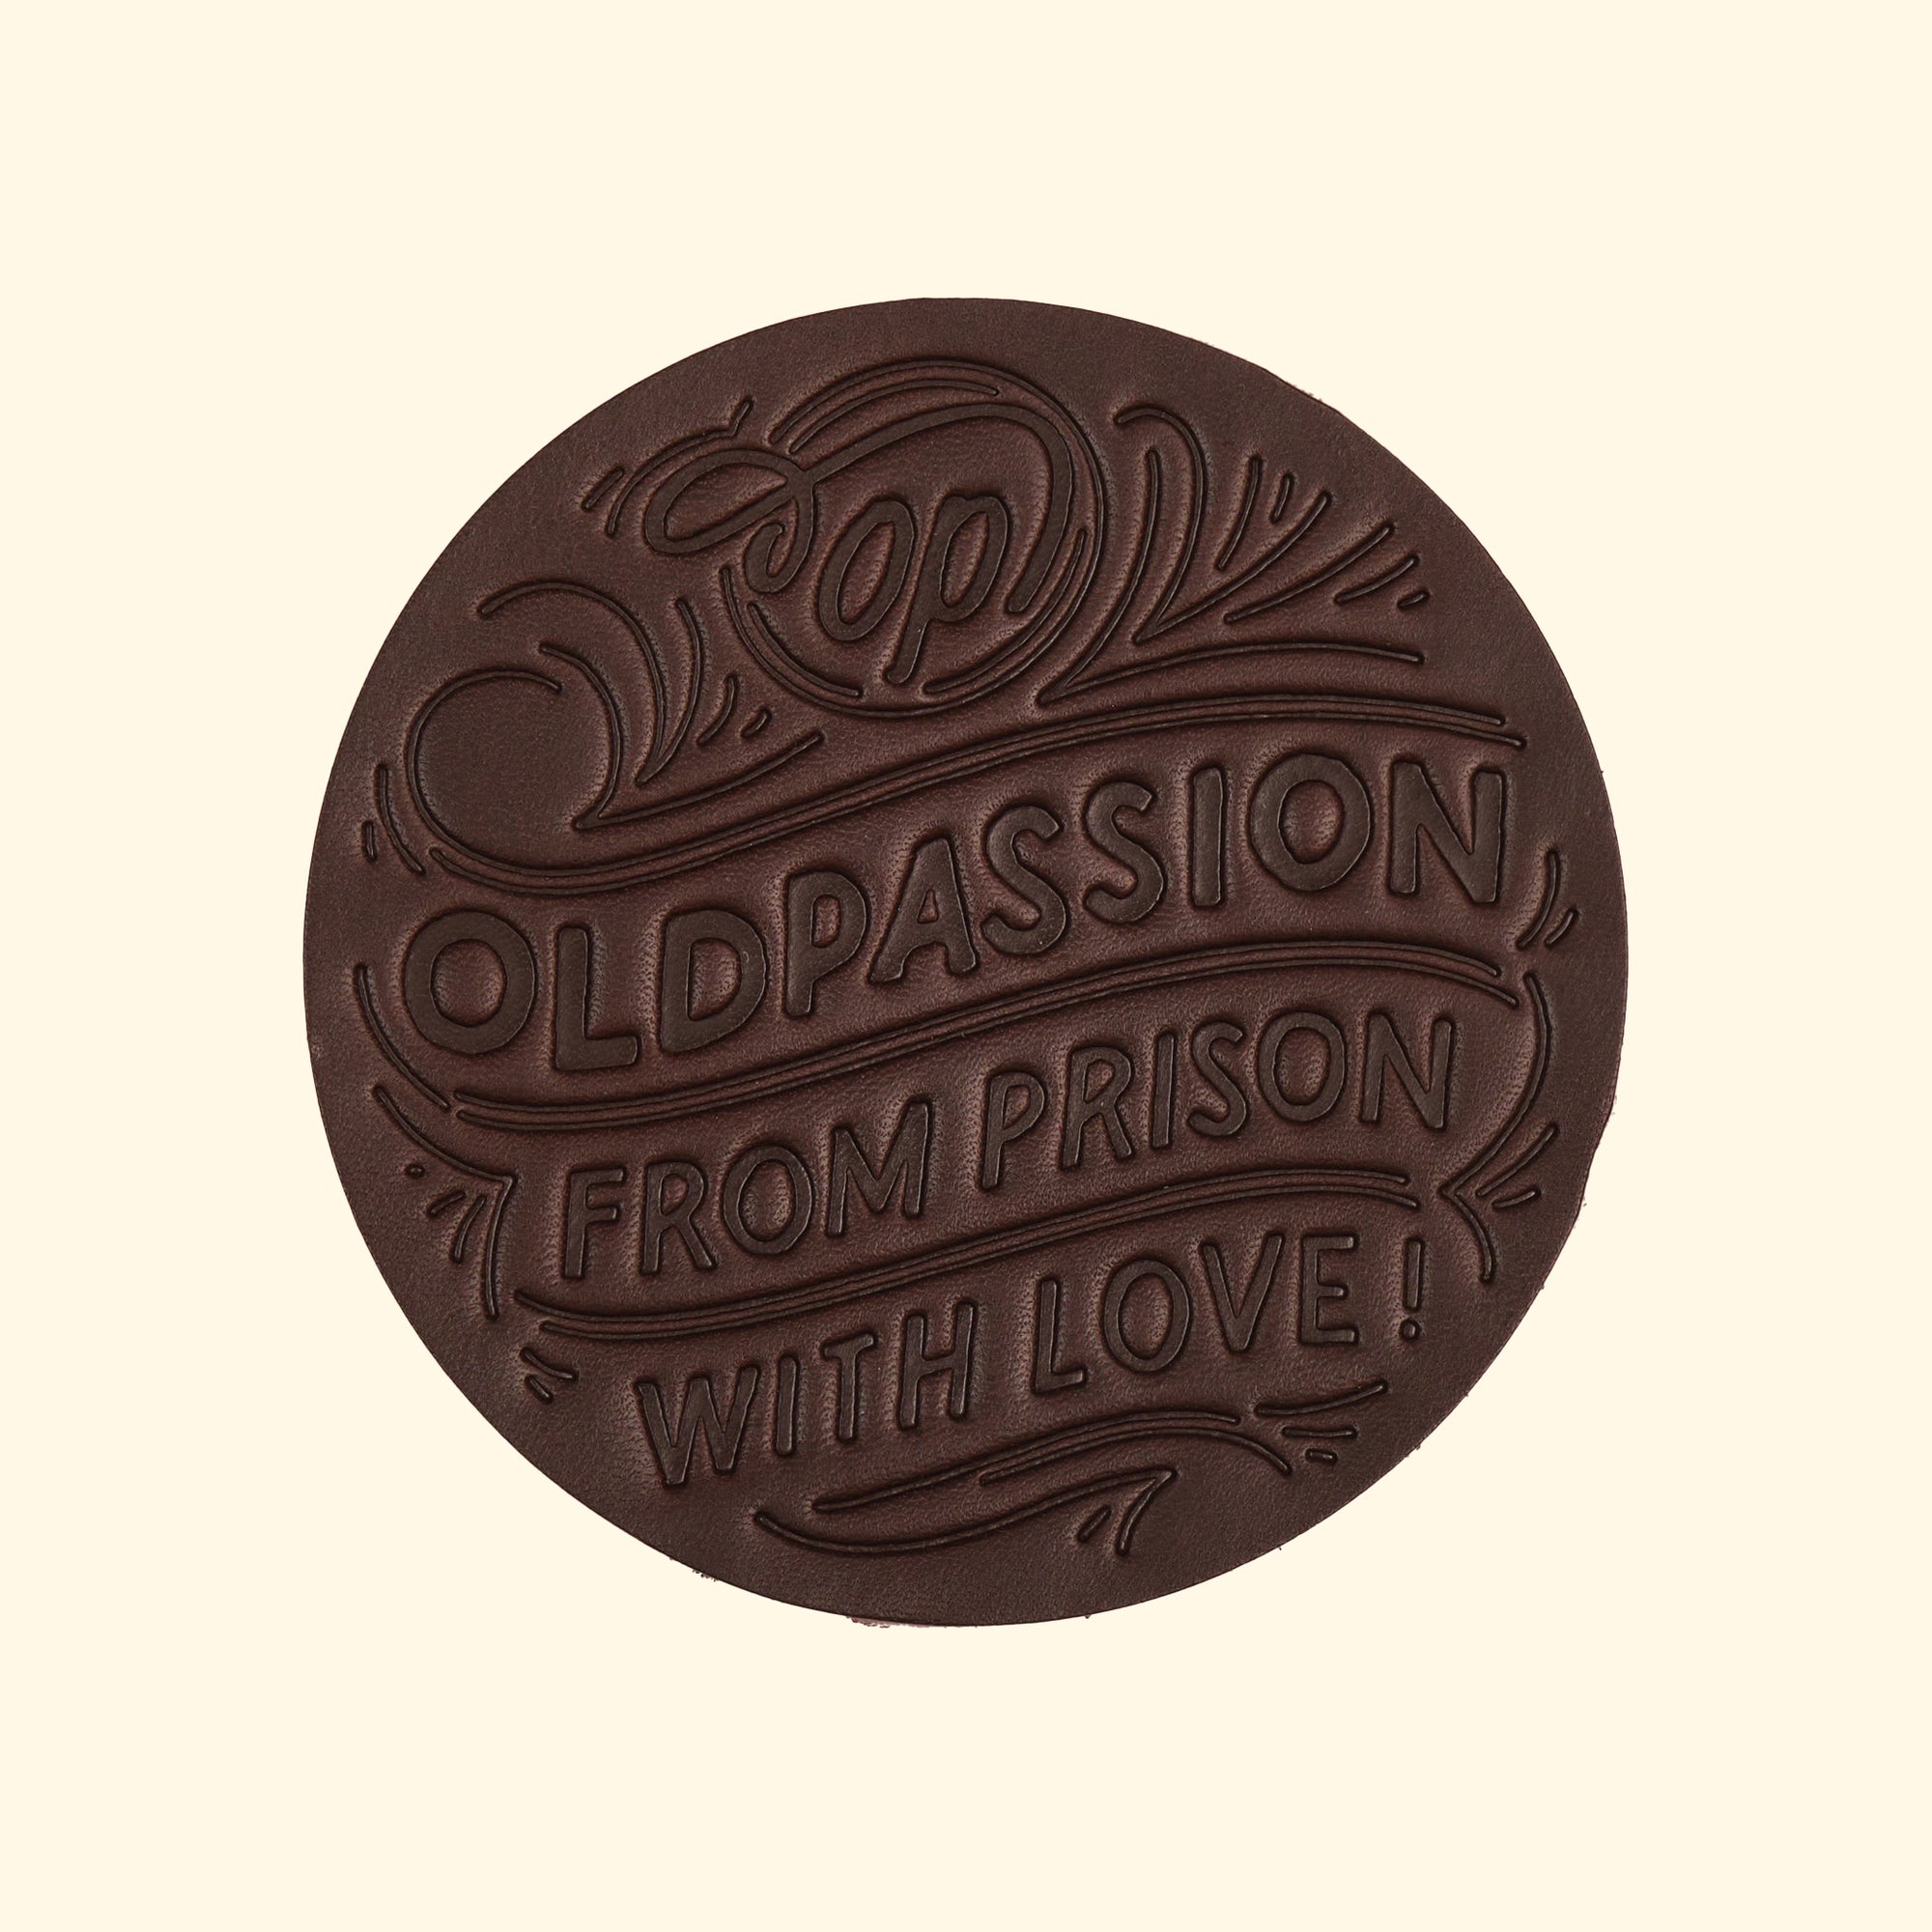 Leather-Coaster_Leder-Glasuntersetzer_Lettering-nature-oldpassion-from-prison-with-love